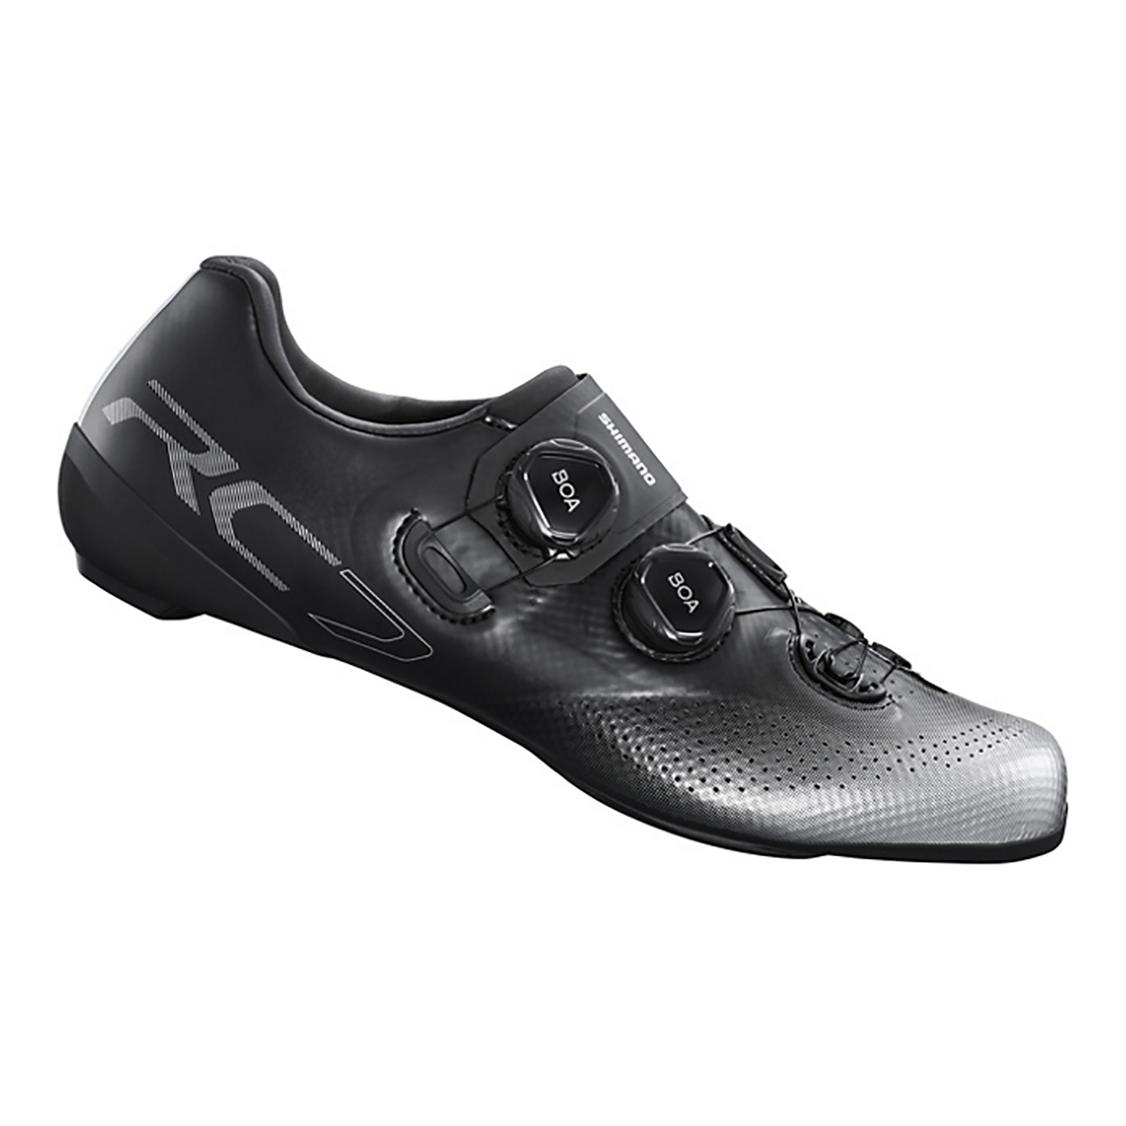 Shimano Chaussures route RC702 Noir 44 